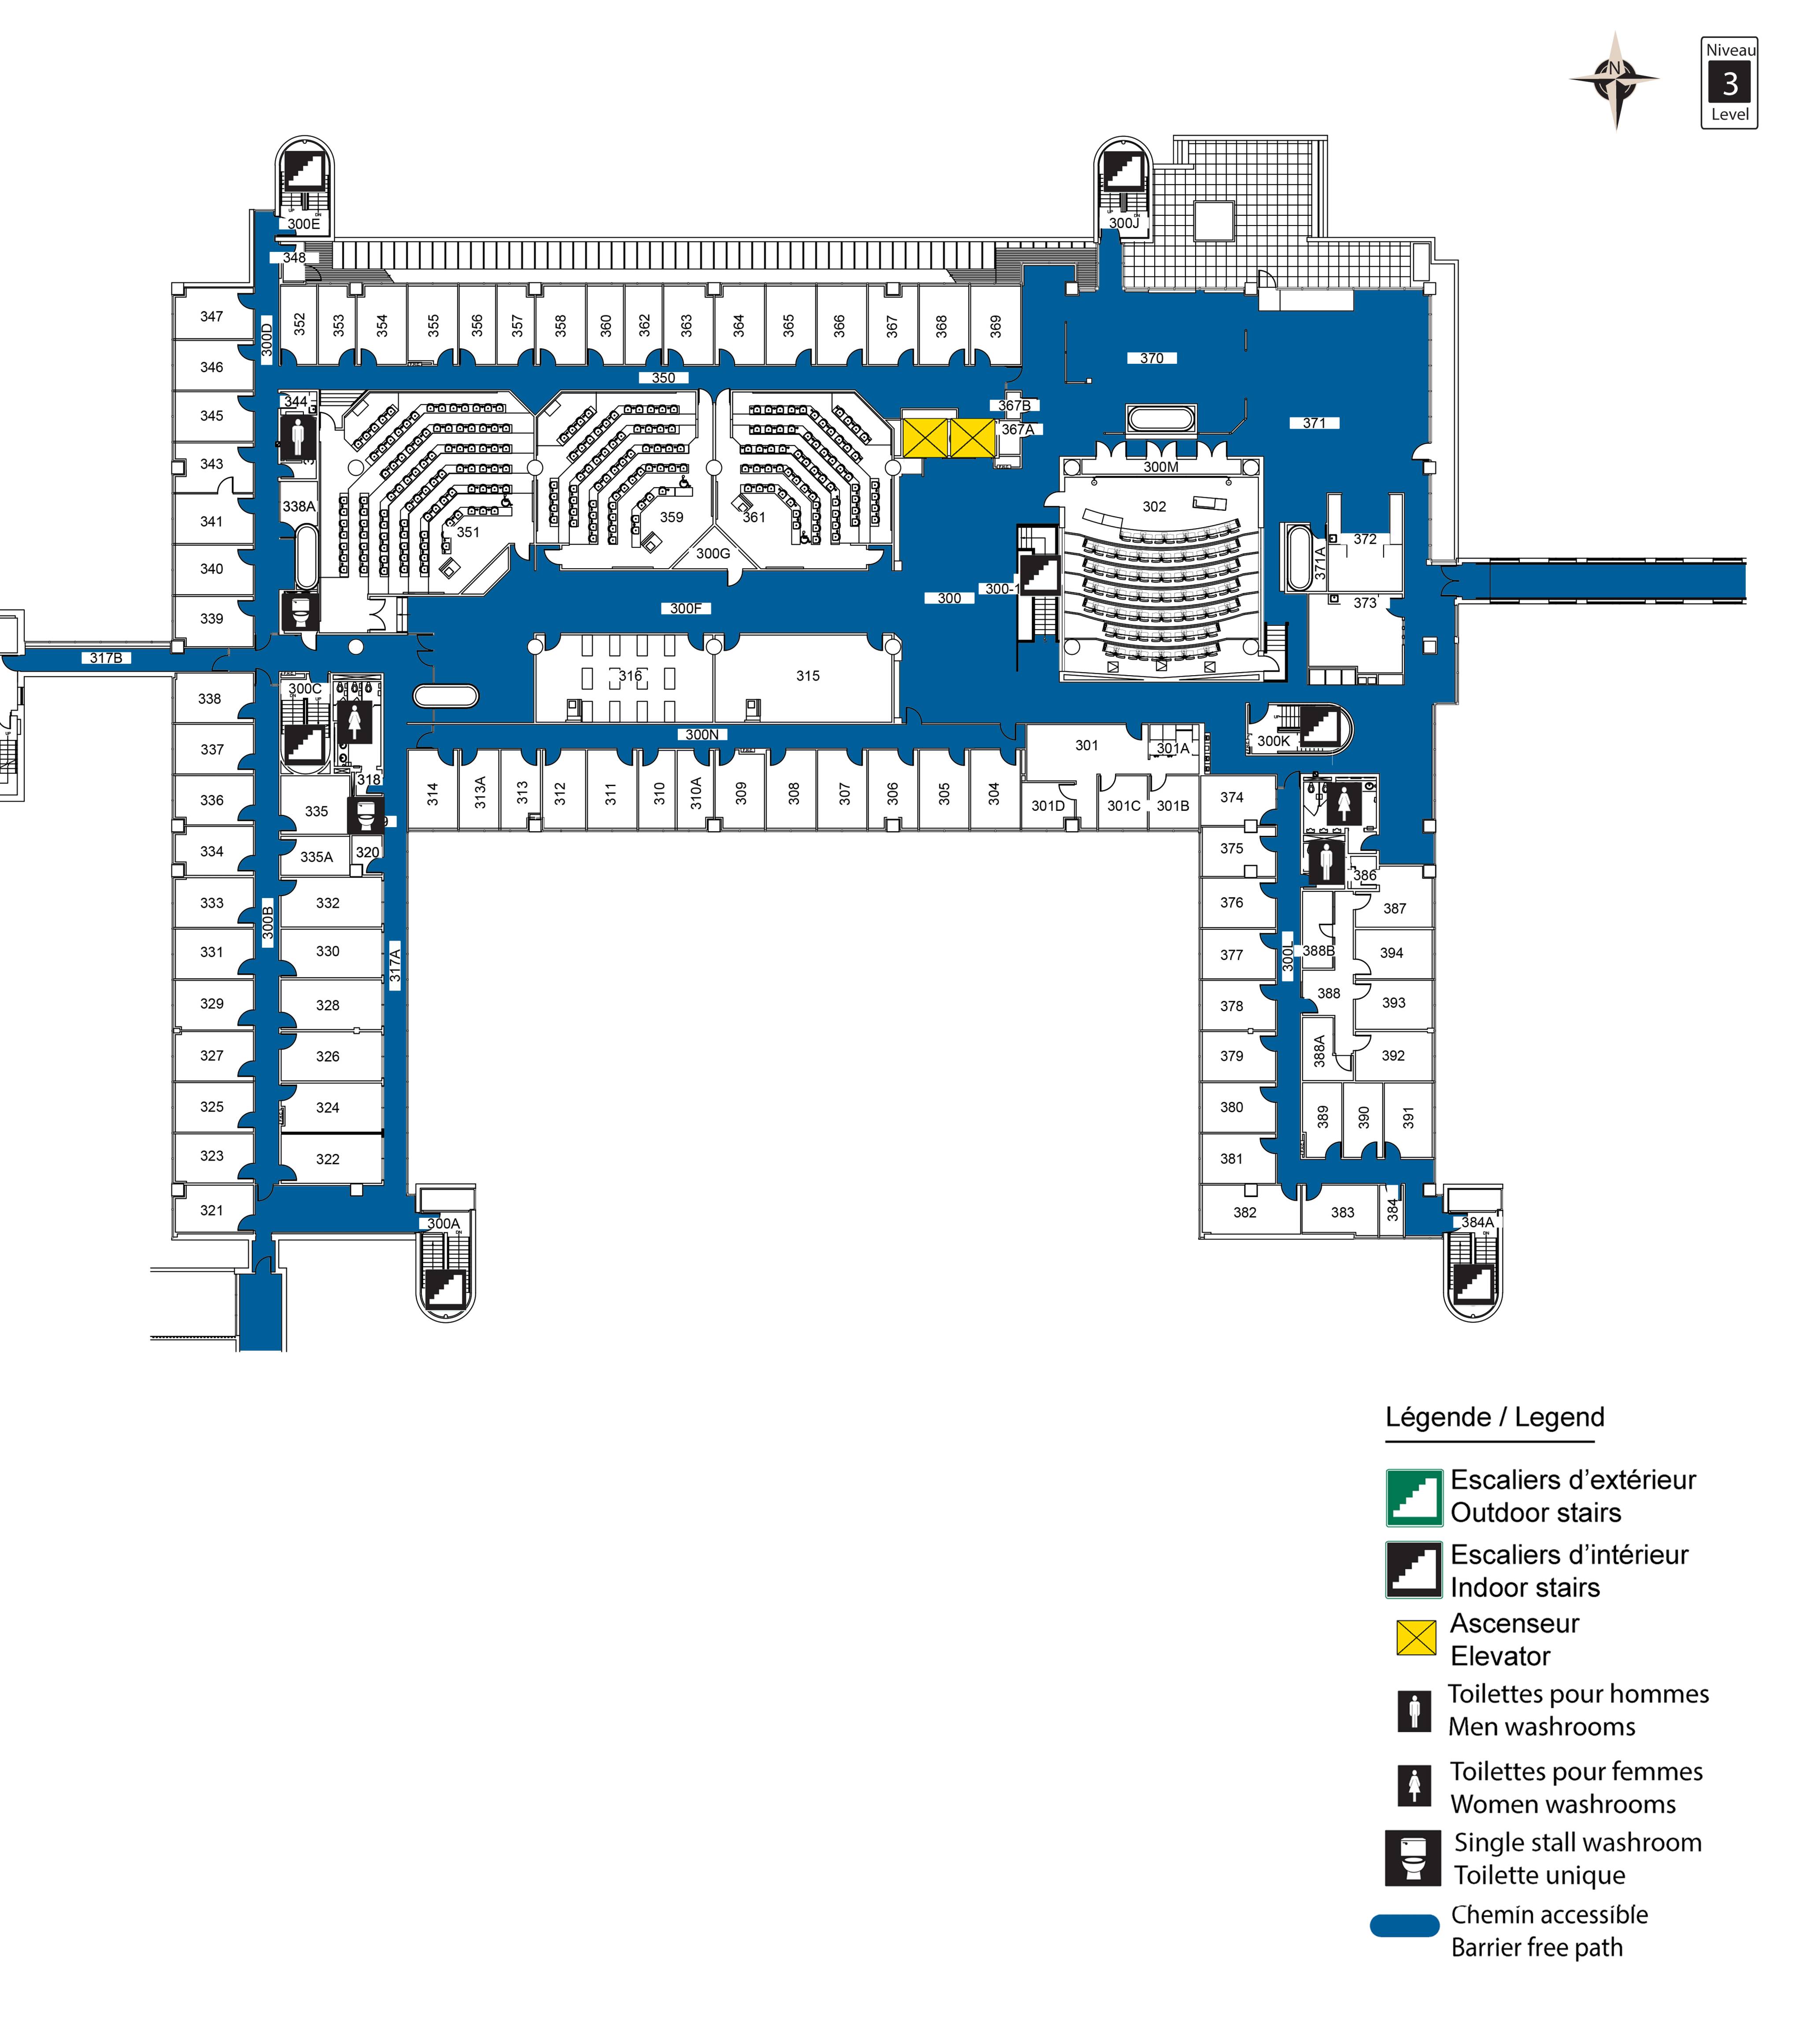 Accessible map - FTX level 3